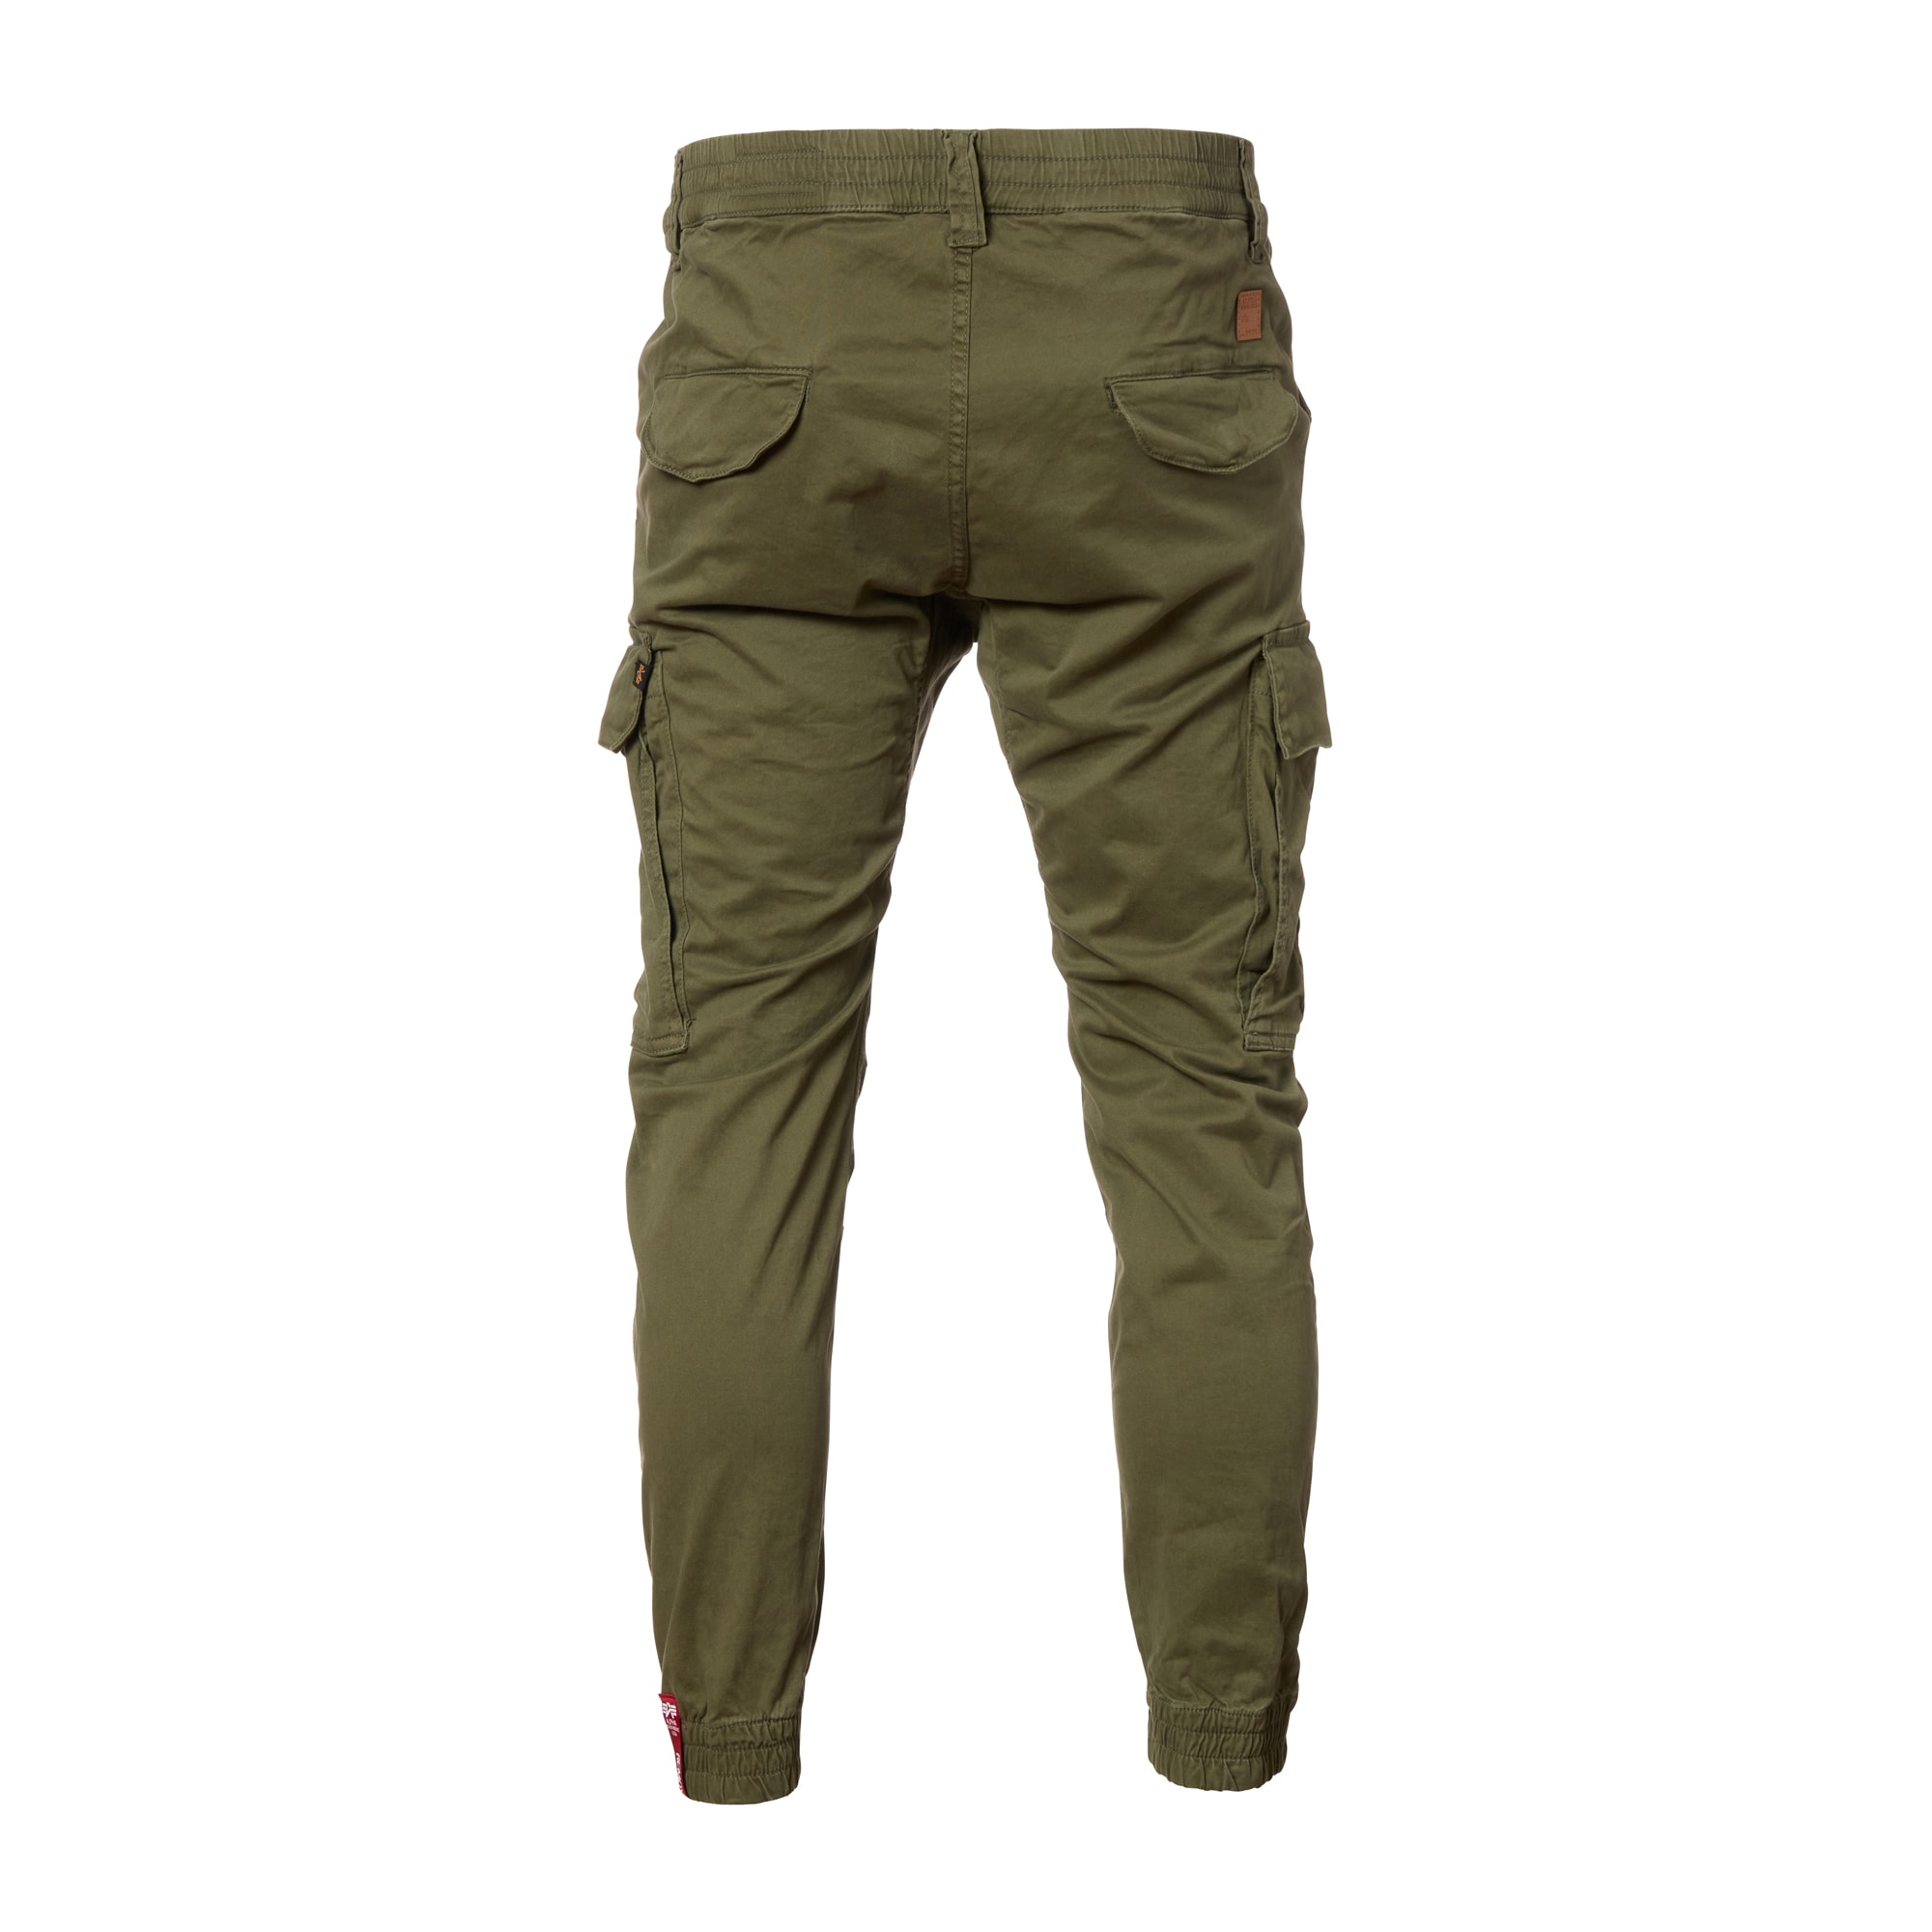 Urban Outfitters Alpha Industries Fatigue Pant | Pacific City